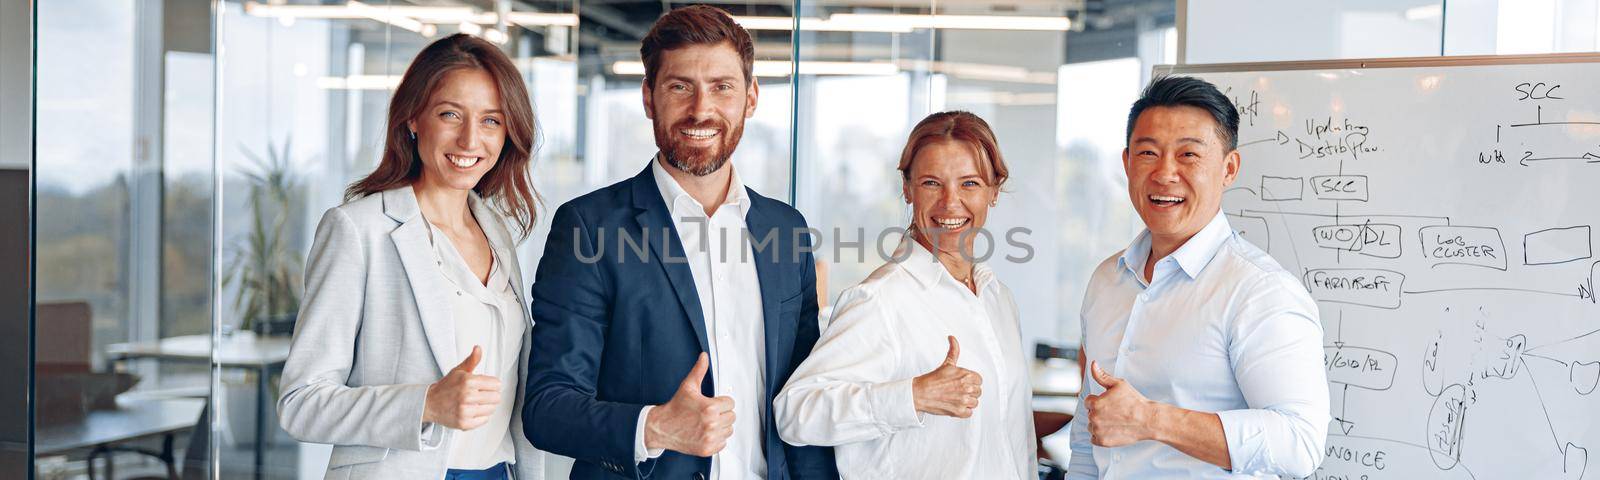 Office employees group showing thumbs up looking at camera, happy professional multicultural team.